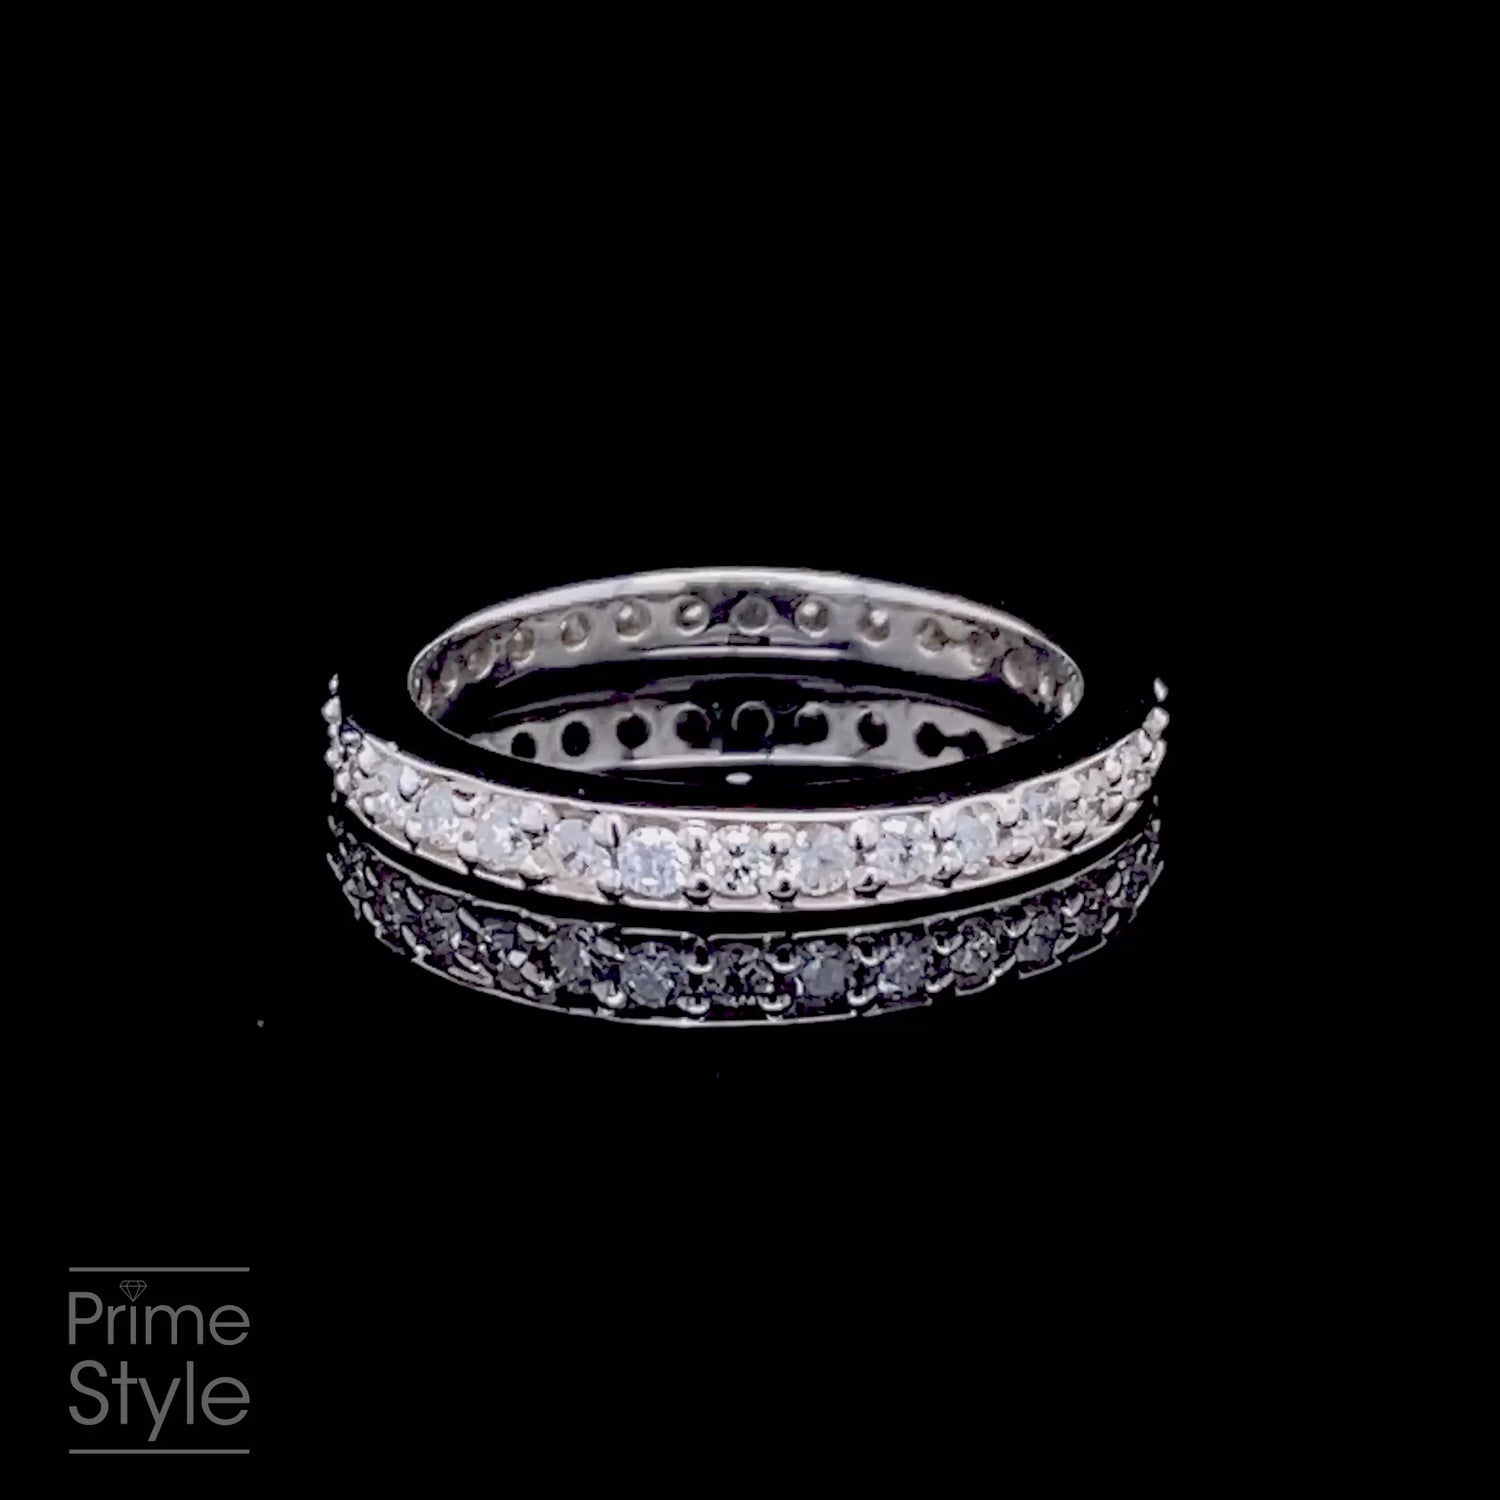 Exclusive 0.50 CT Round Cut Diamond Eternity Ring in 14KT White Gold